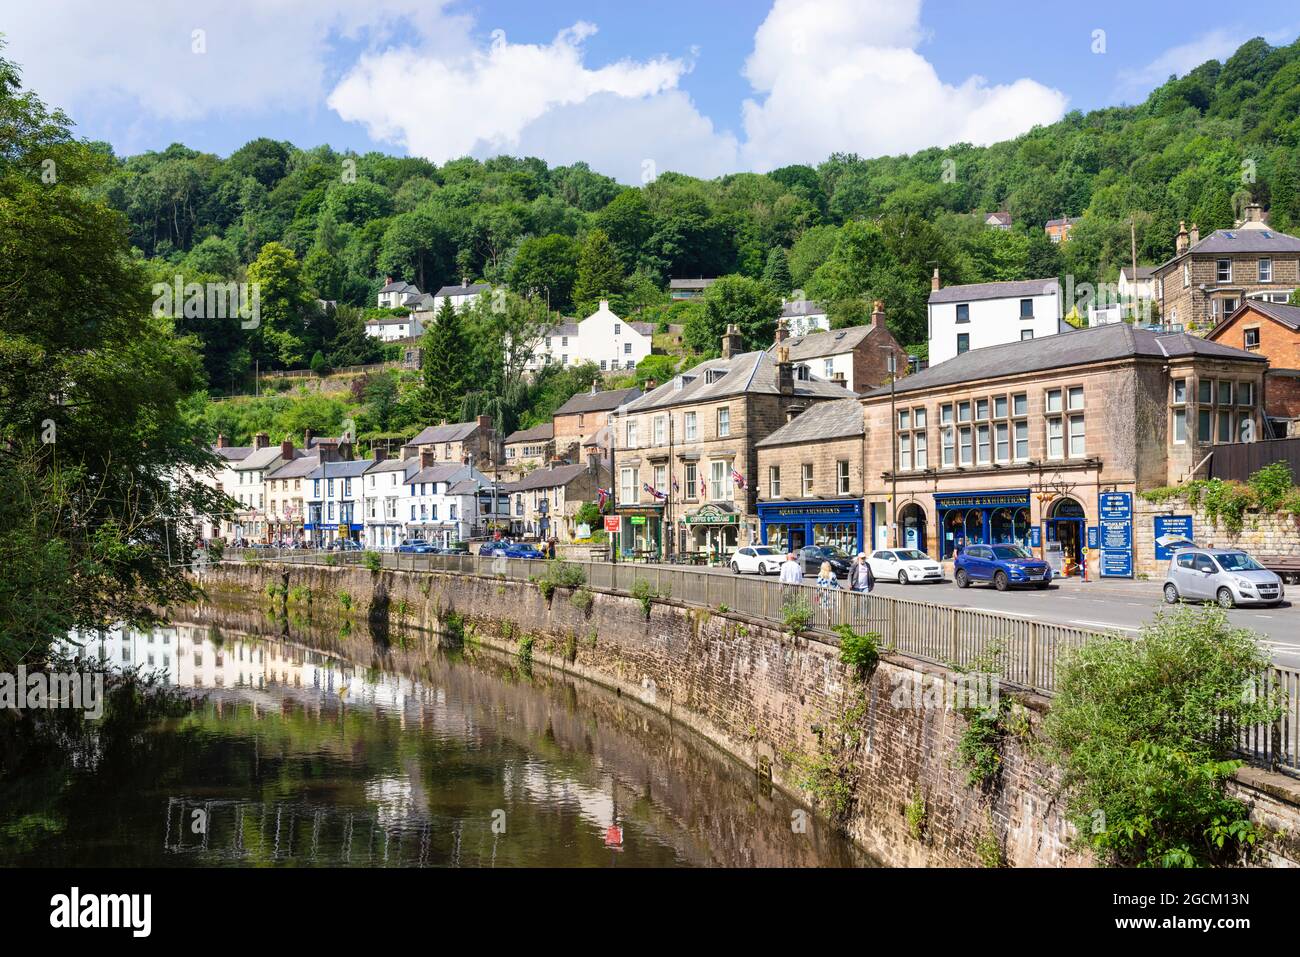 Matlock bath town centre with shops and cafes alongside the river Derwent North Parade Derbyshire England UK GB Europe Stock Photo